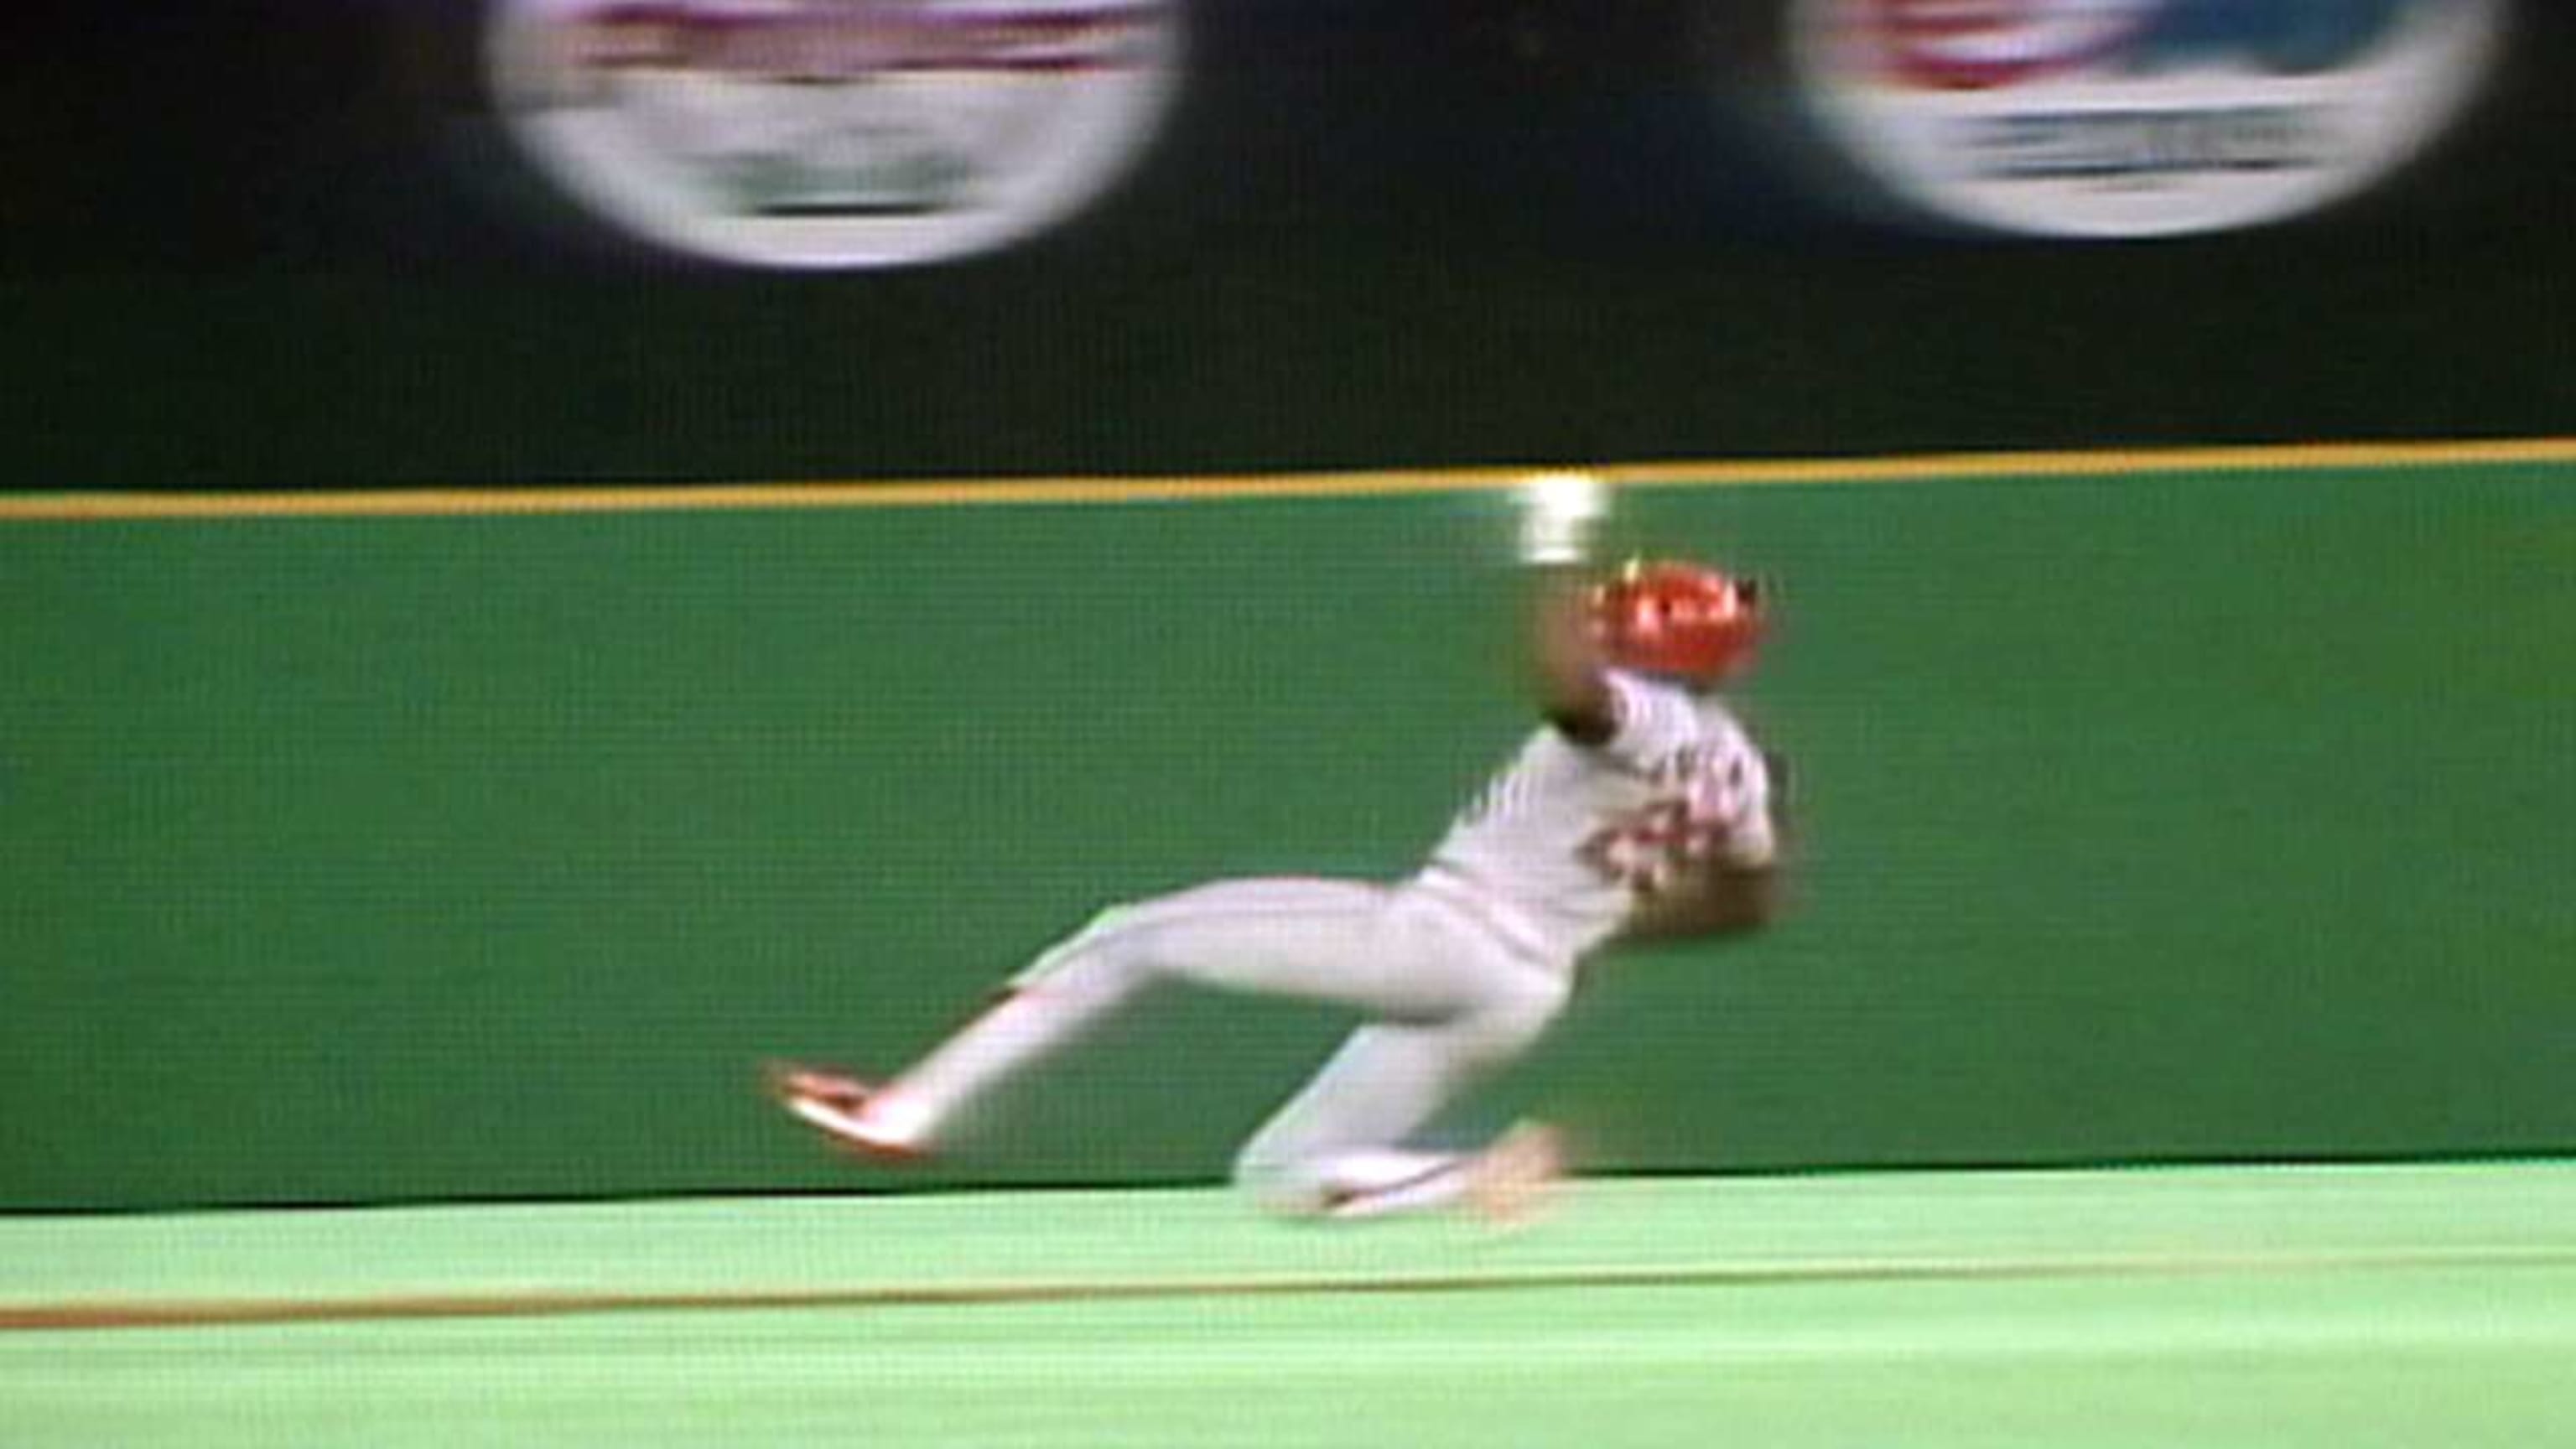 Vince Coleman and his comeback attempt with Cardinals